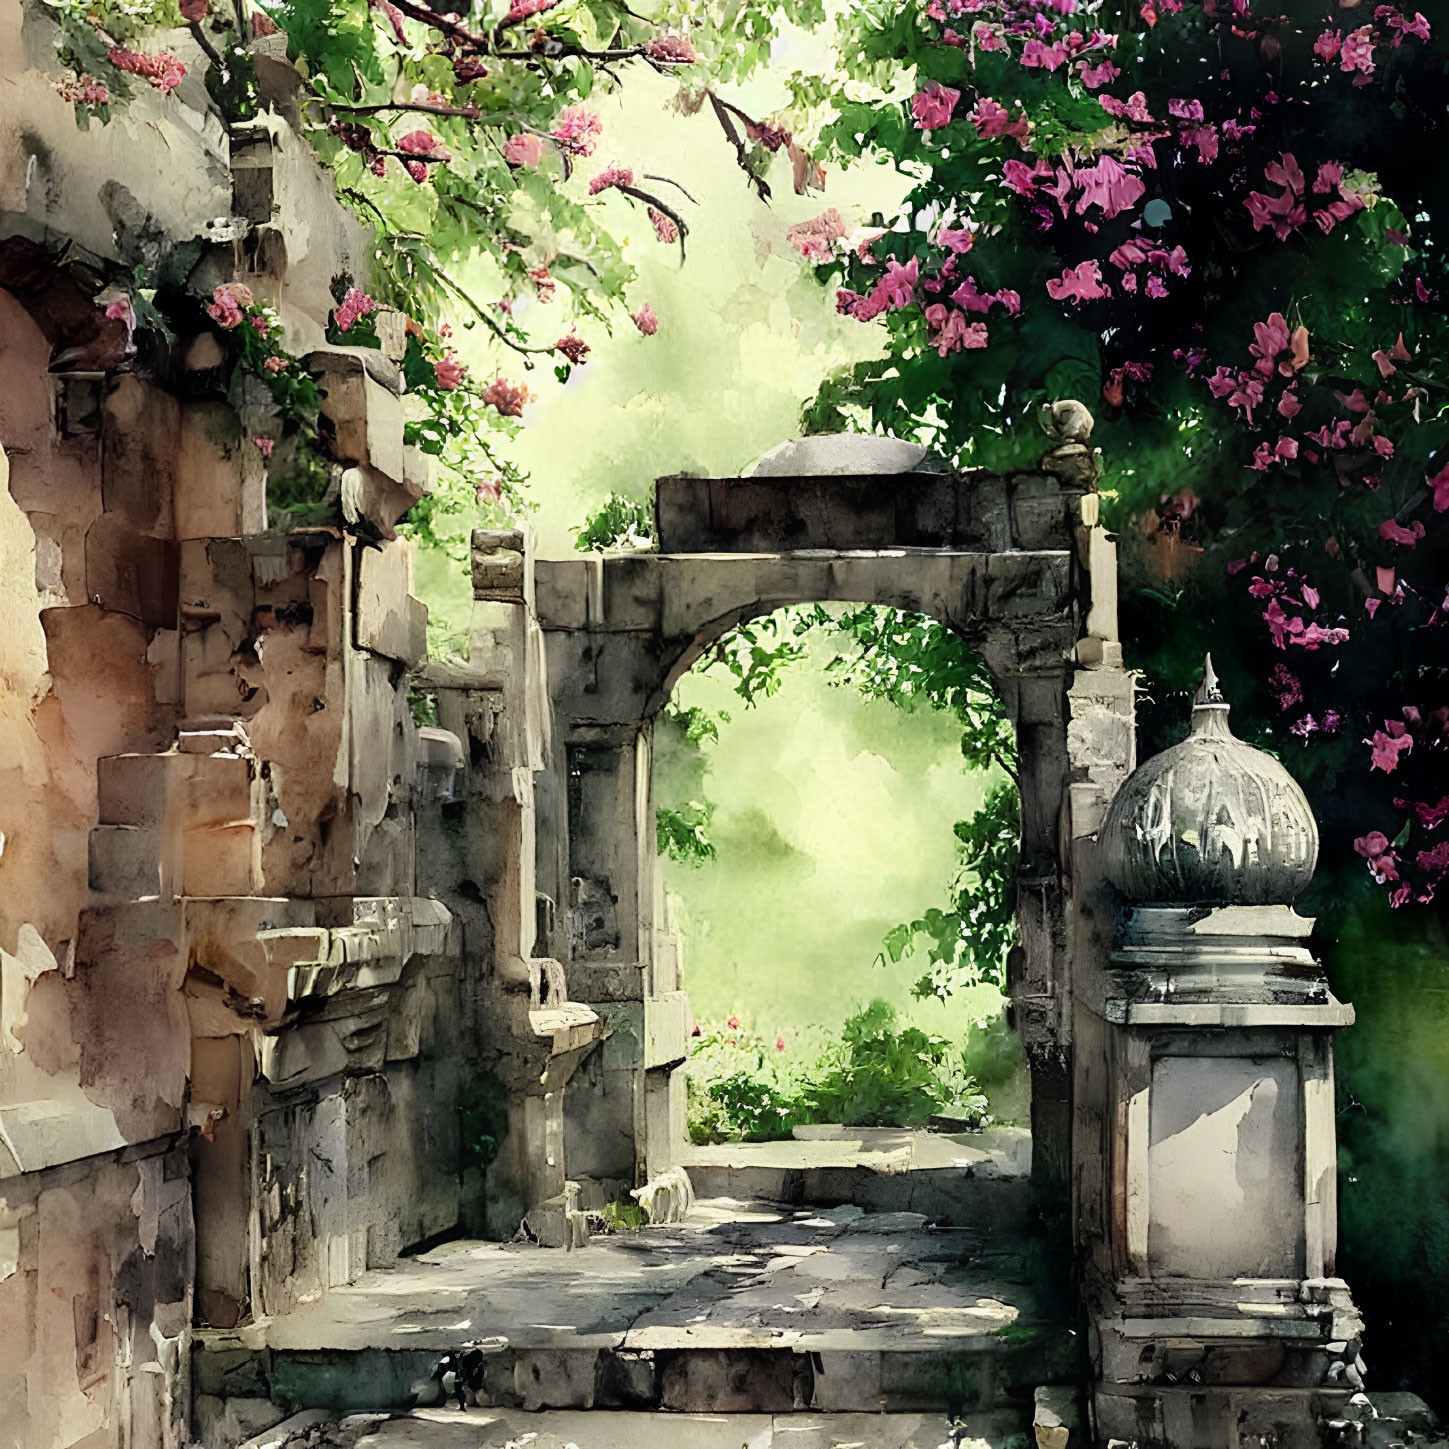 Watercolor painting of old stone archway in garden with lush trees and pink blossoms